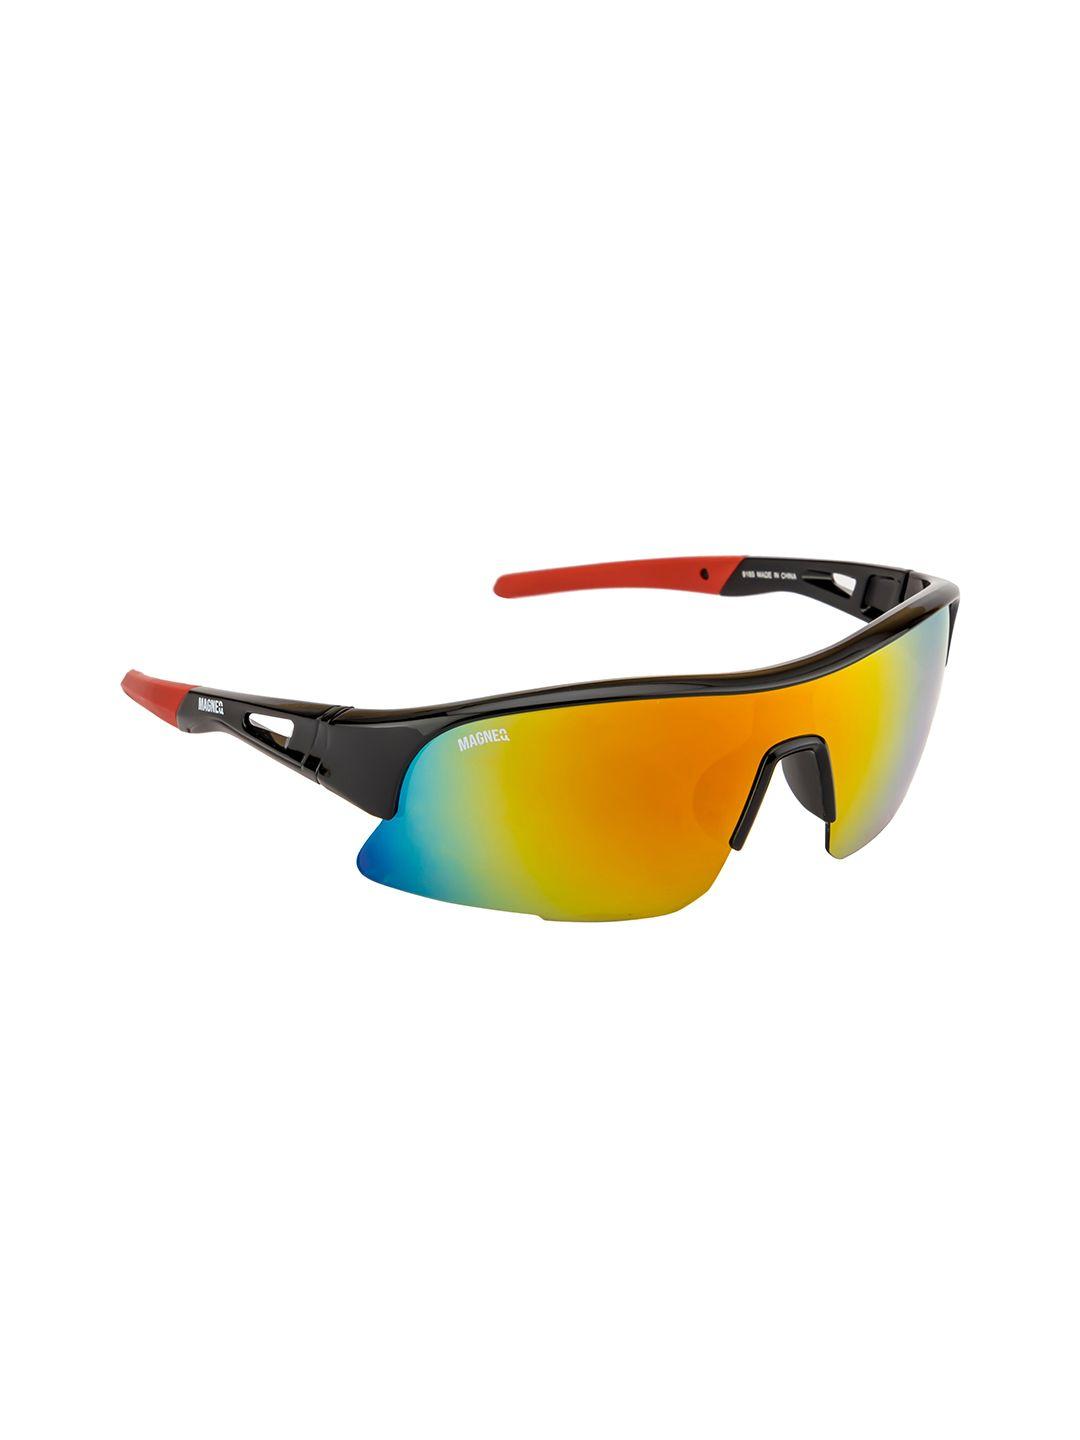 magneq sports sunglasses with uv protected lens mg 9185/s c2 7519